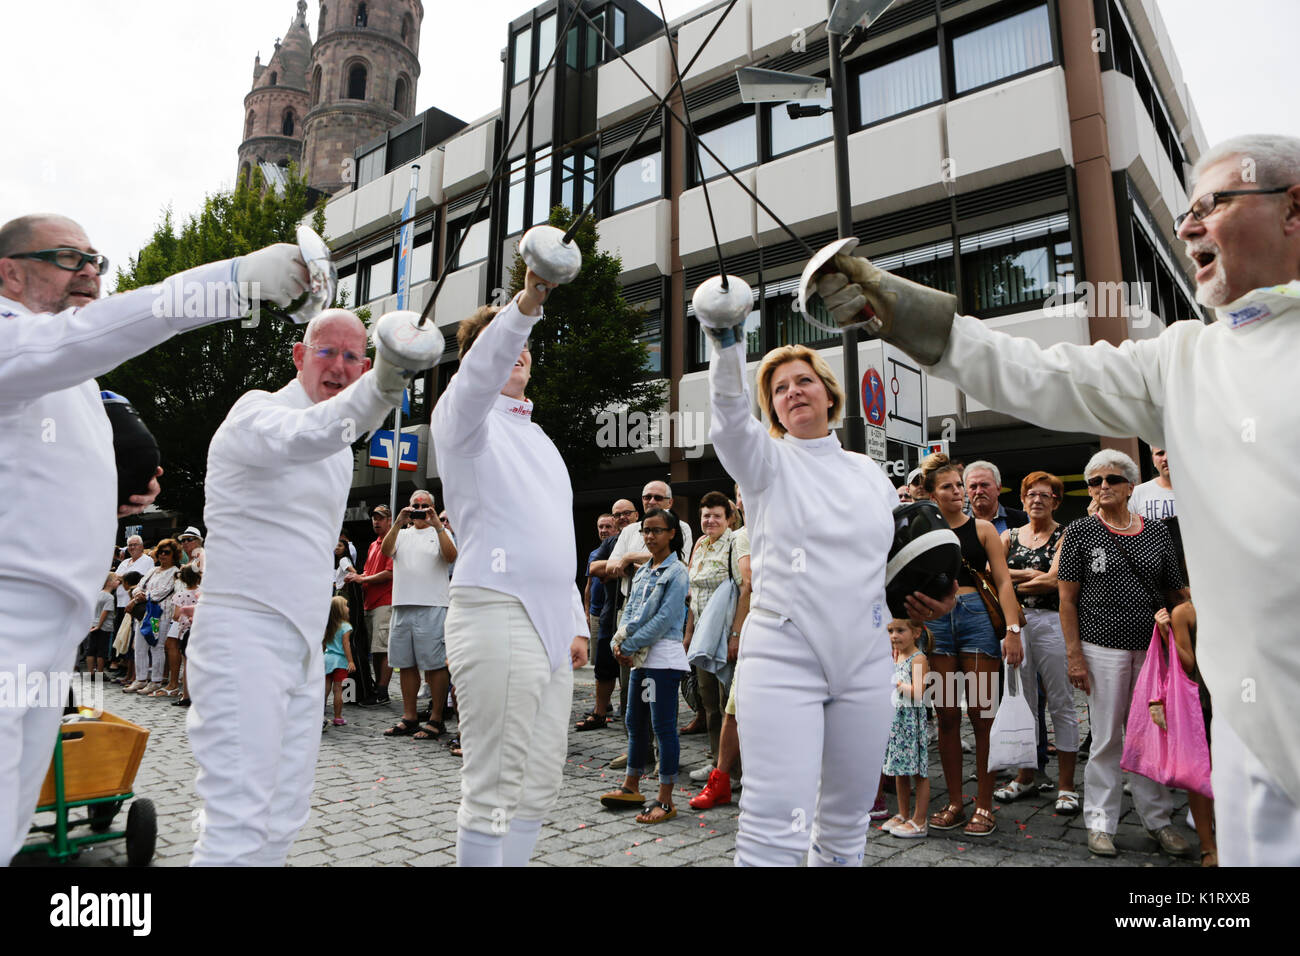 Worms, Germany. 27th August 2017. Fencers present their weapons in the parade. The first highlight of the 2017 Backfischfest was the big parade through the city of Worms with over 80 groups and floats. Community groups, music groups and business from Worms and further afield took part. Credit: Michael Debets/Alamy Live News Stock Photo